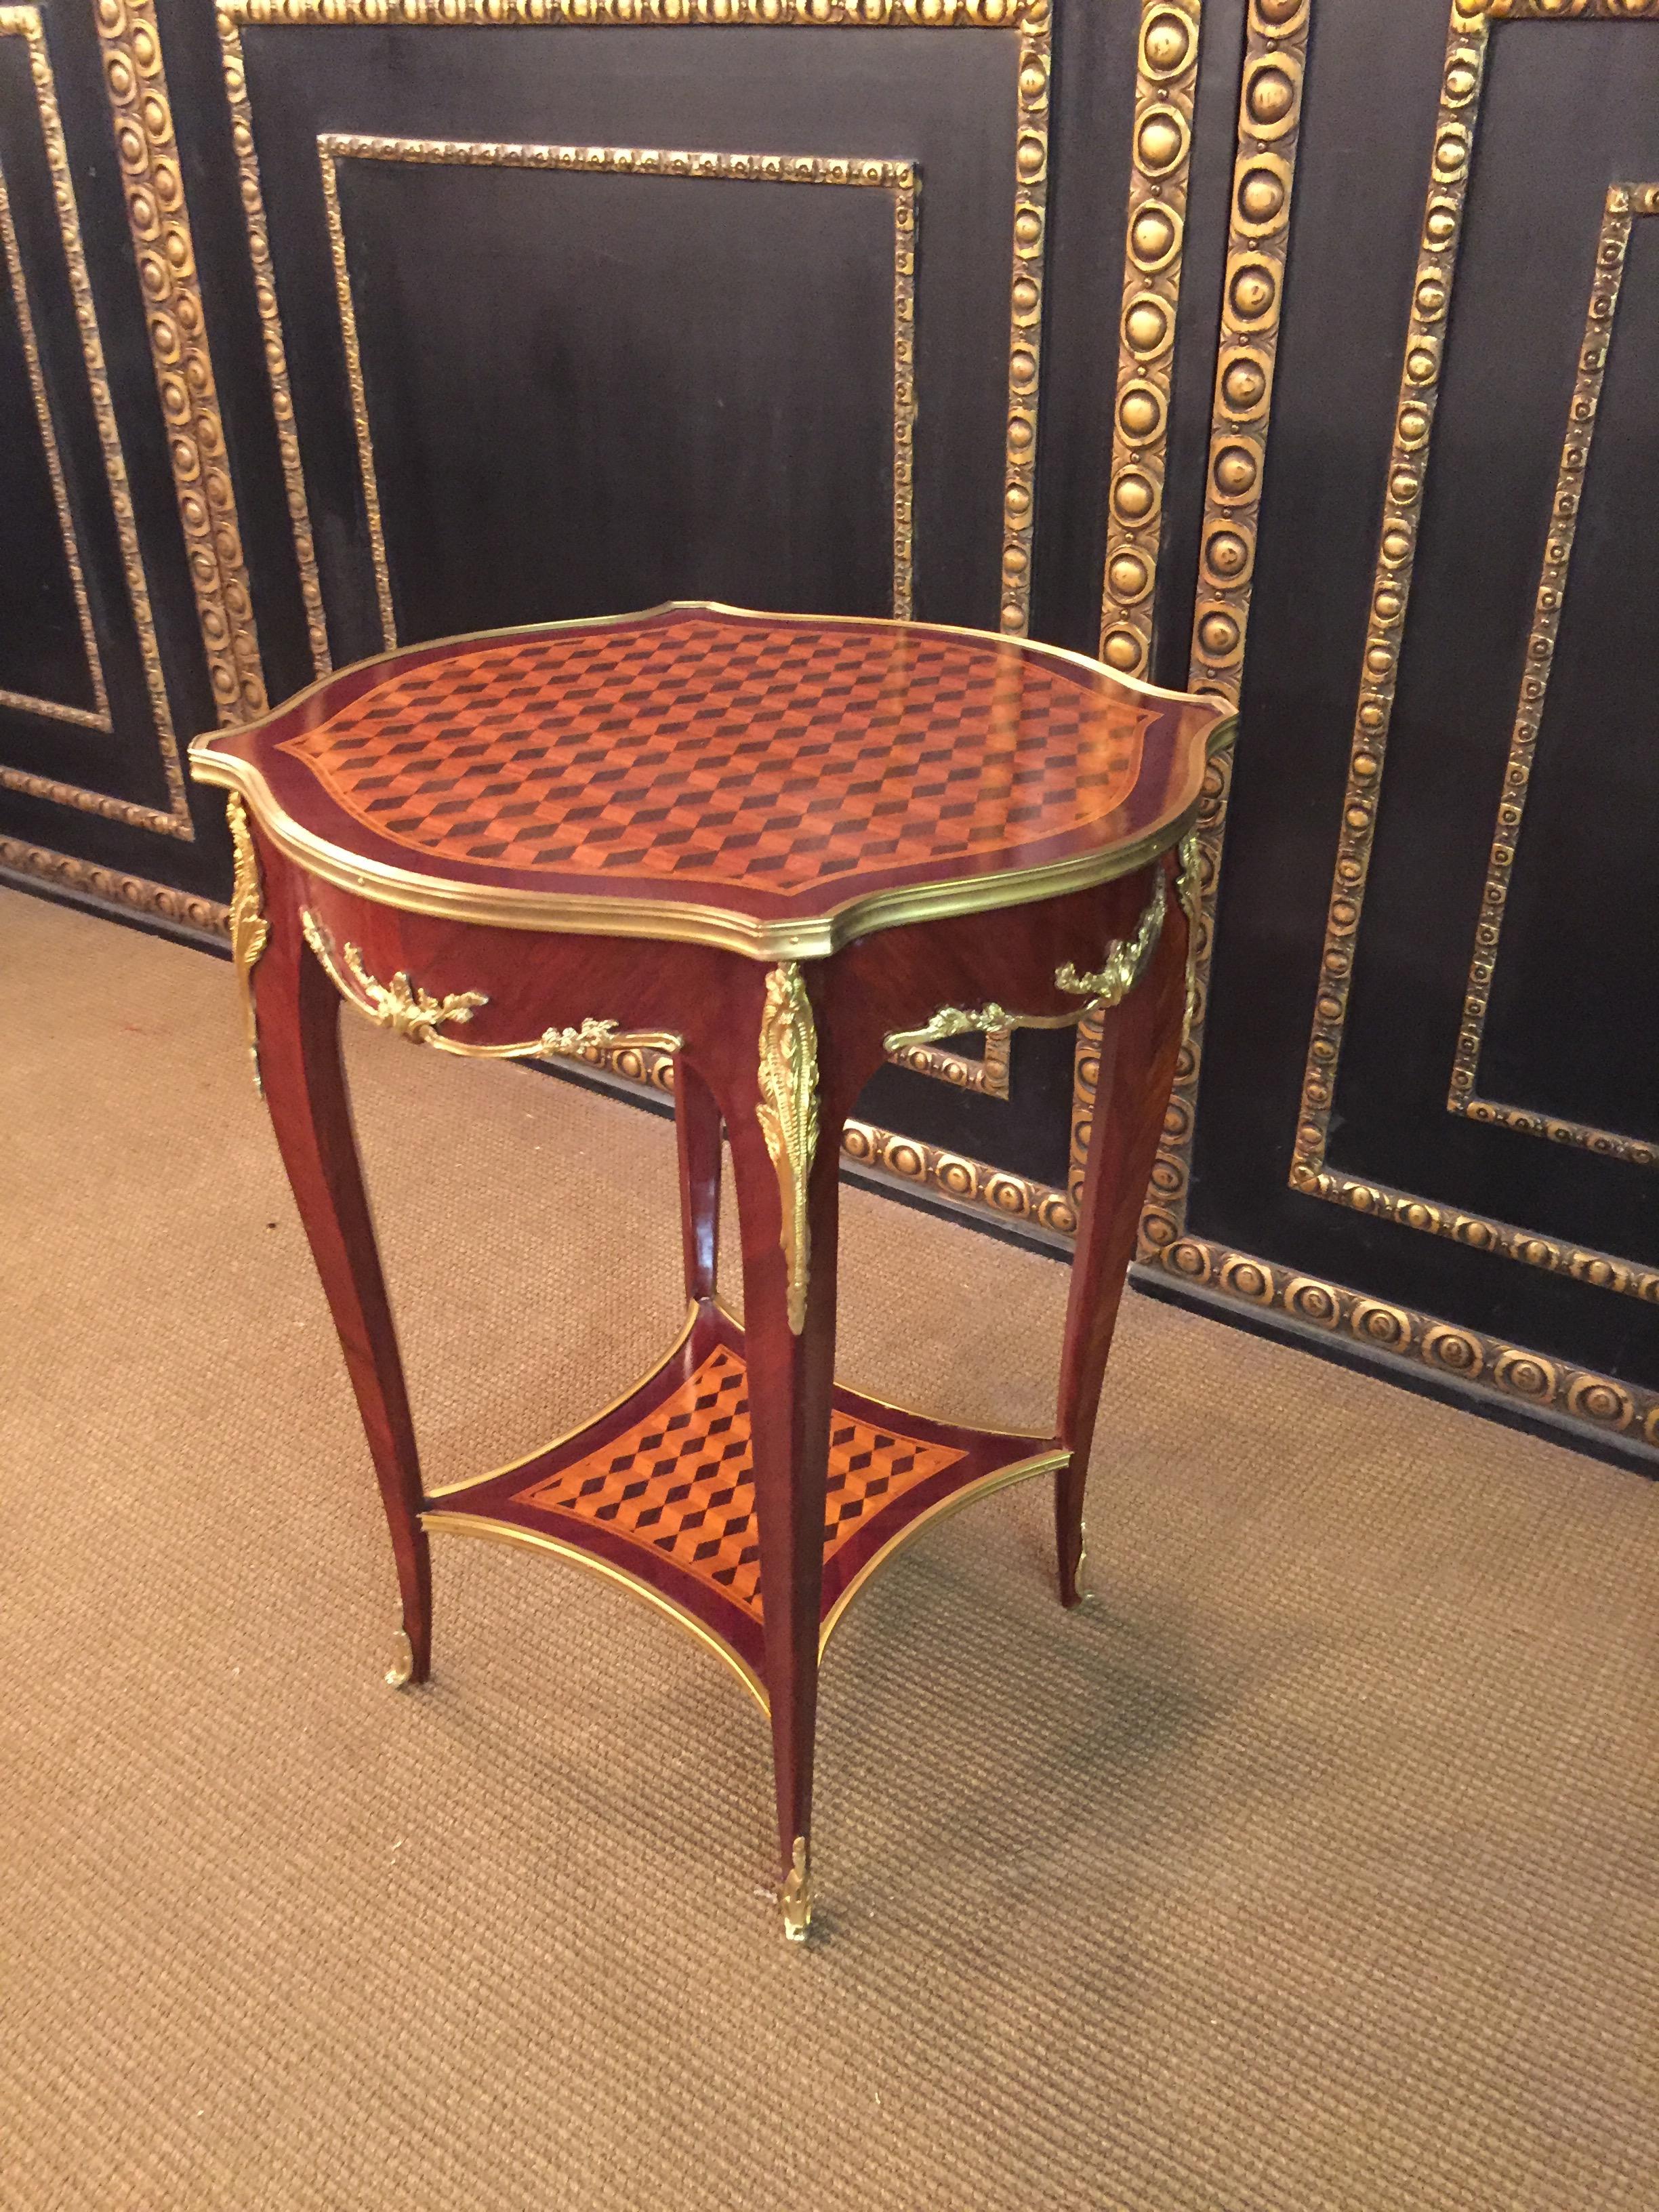 Mahogany  on solid beech with inlays, slightly convex and concave, carcass, flanked by extended corner strips on high, elegantly curved legs in ending with lower sabots.